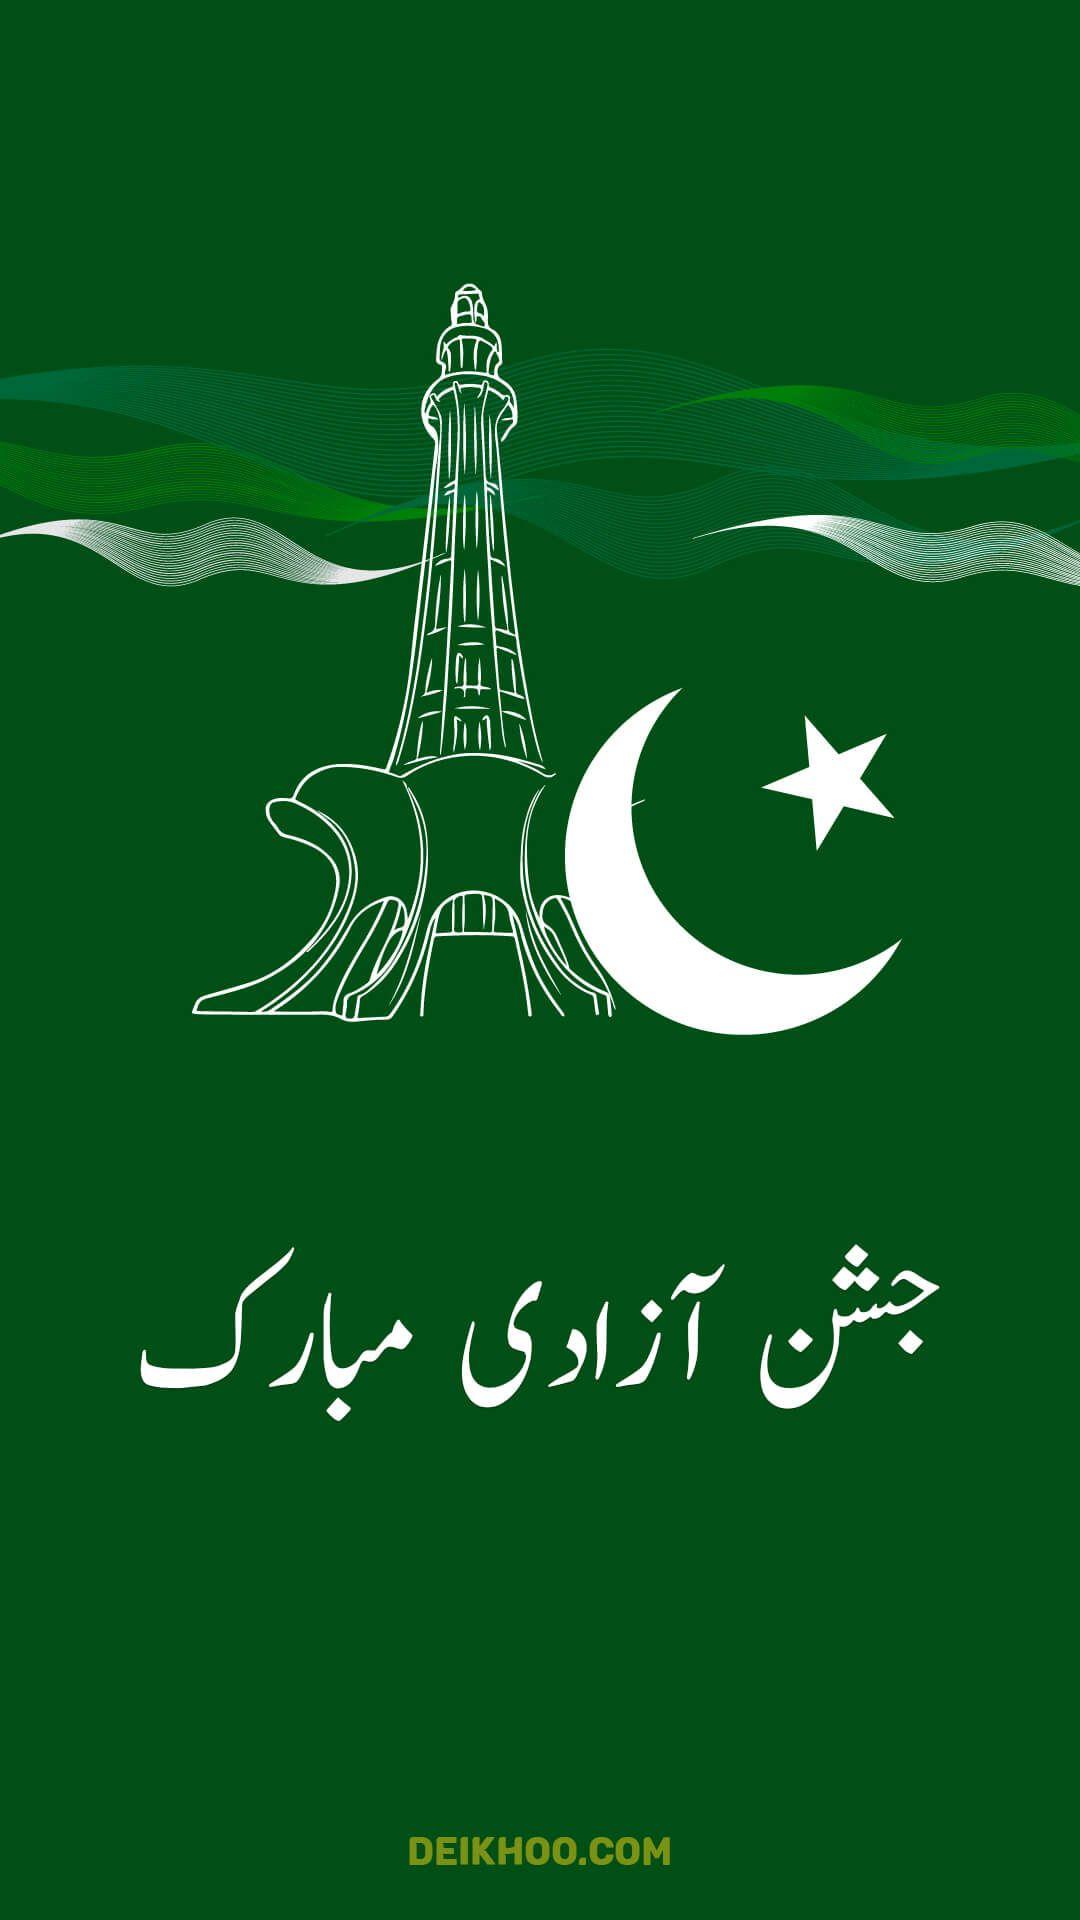 Dps For Facebook Happy independence day Pakistan 2018  Pakistan flag  wallpaper Independence day wallpaper Happy independence day pakistan